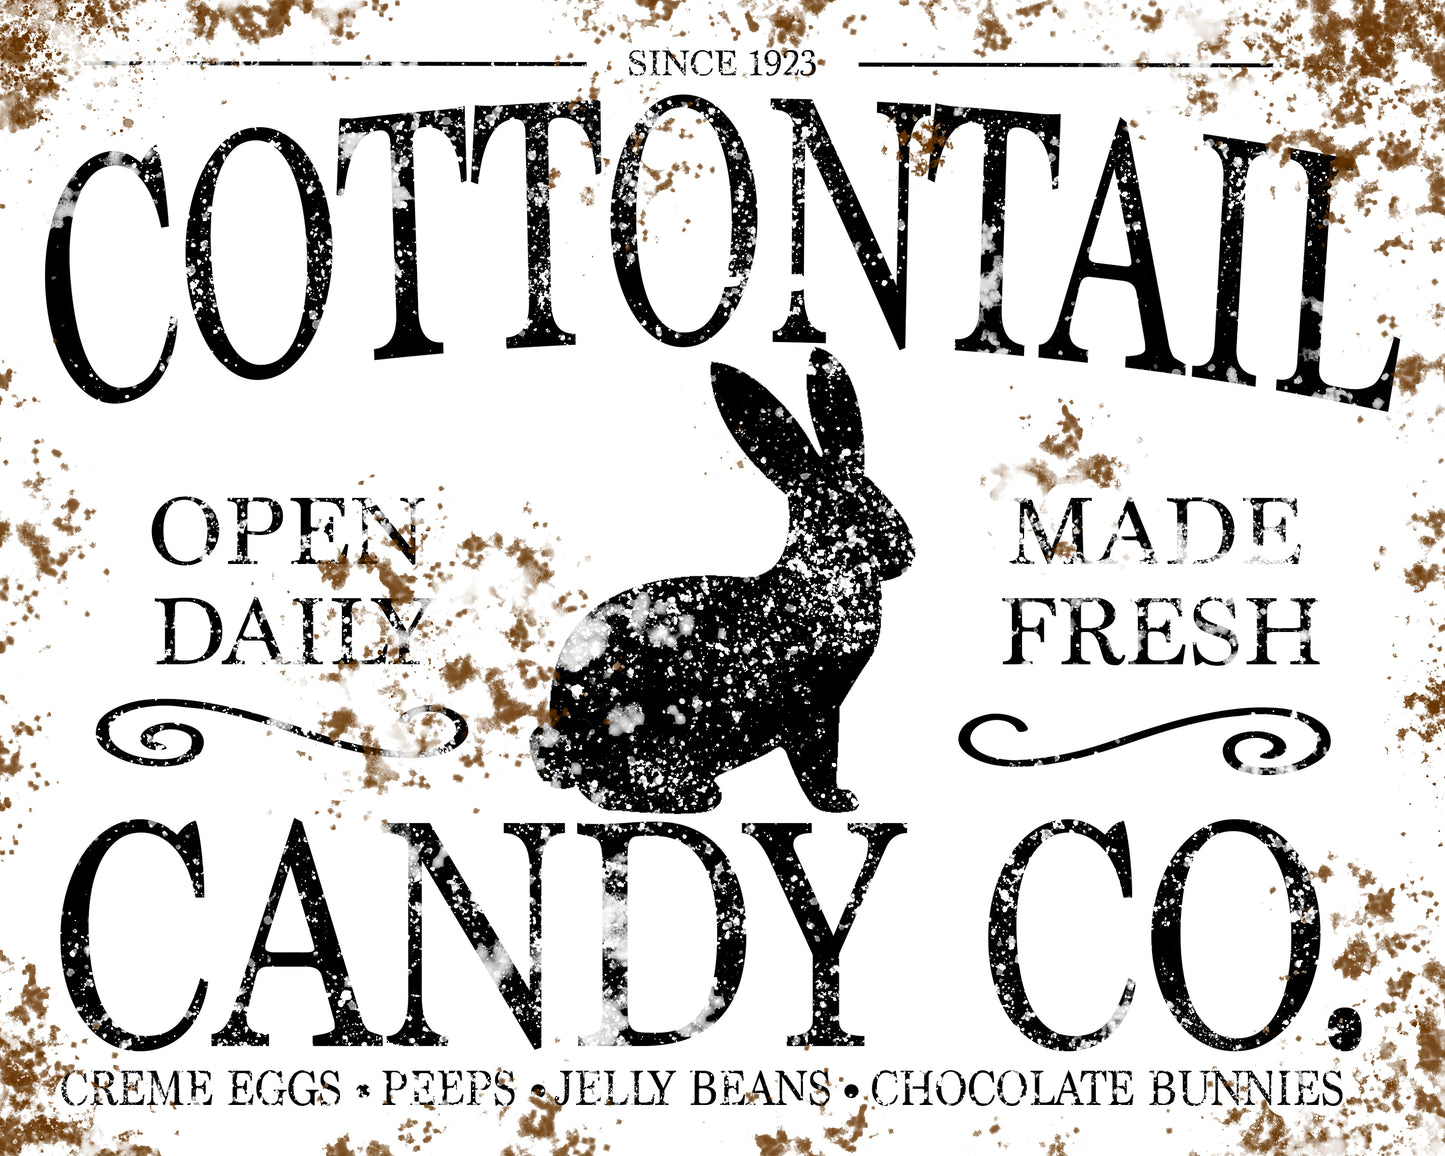 COTTONTAIL CANDY CO.